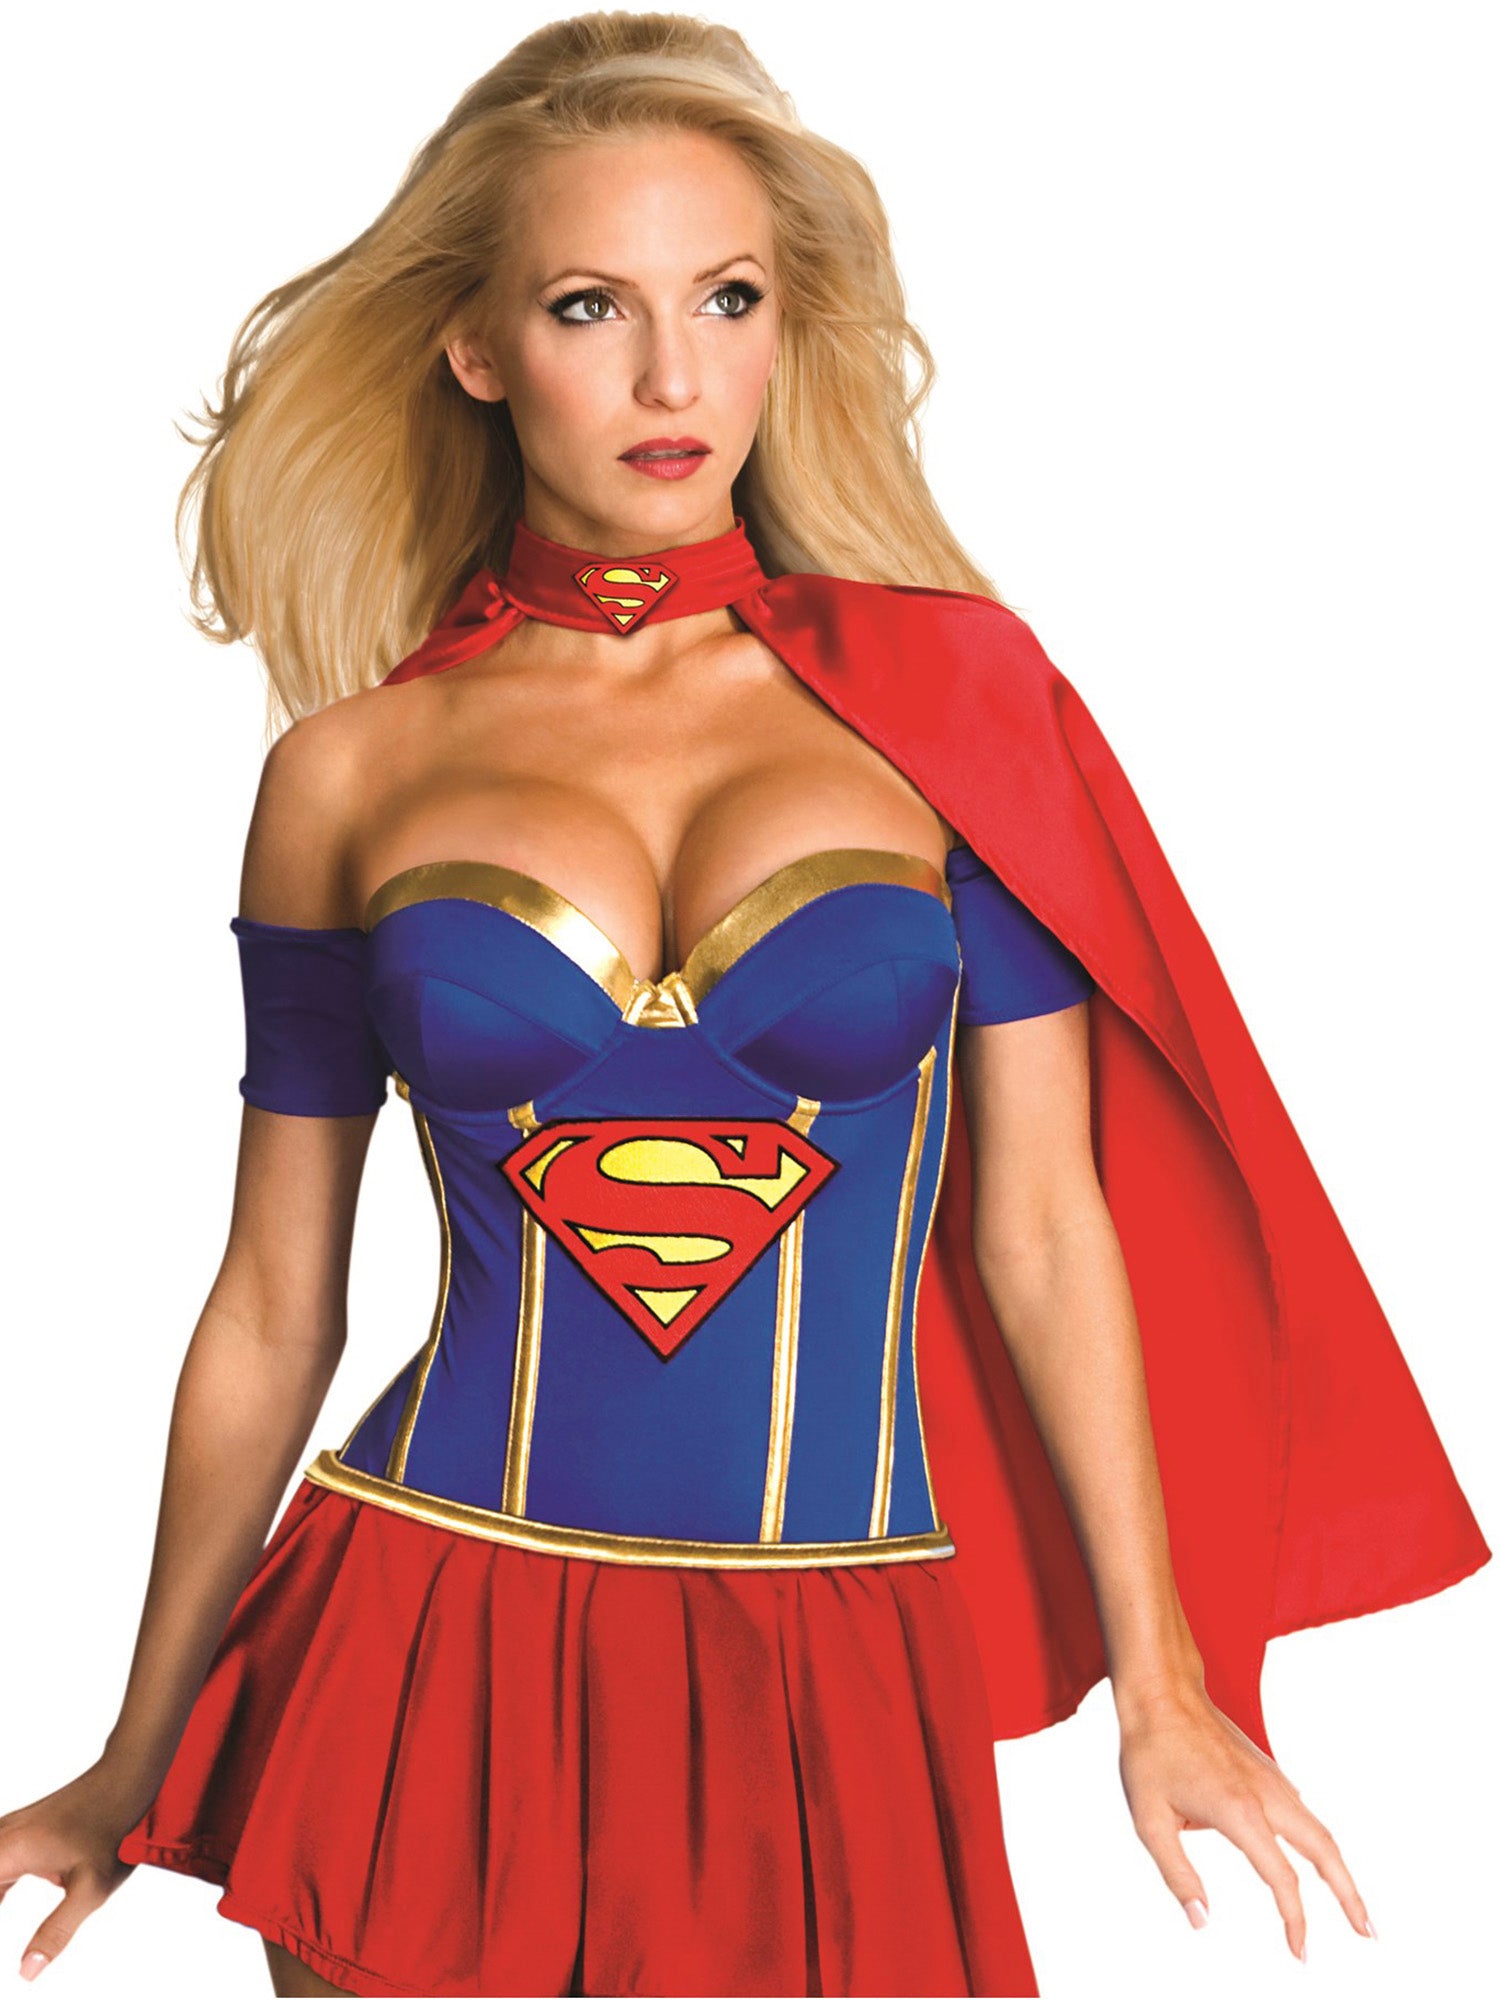 Amazon Superhero Costumes - for Girls and Boys ⋆ Sugar, Spice and Glitter